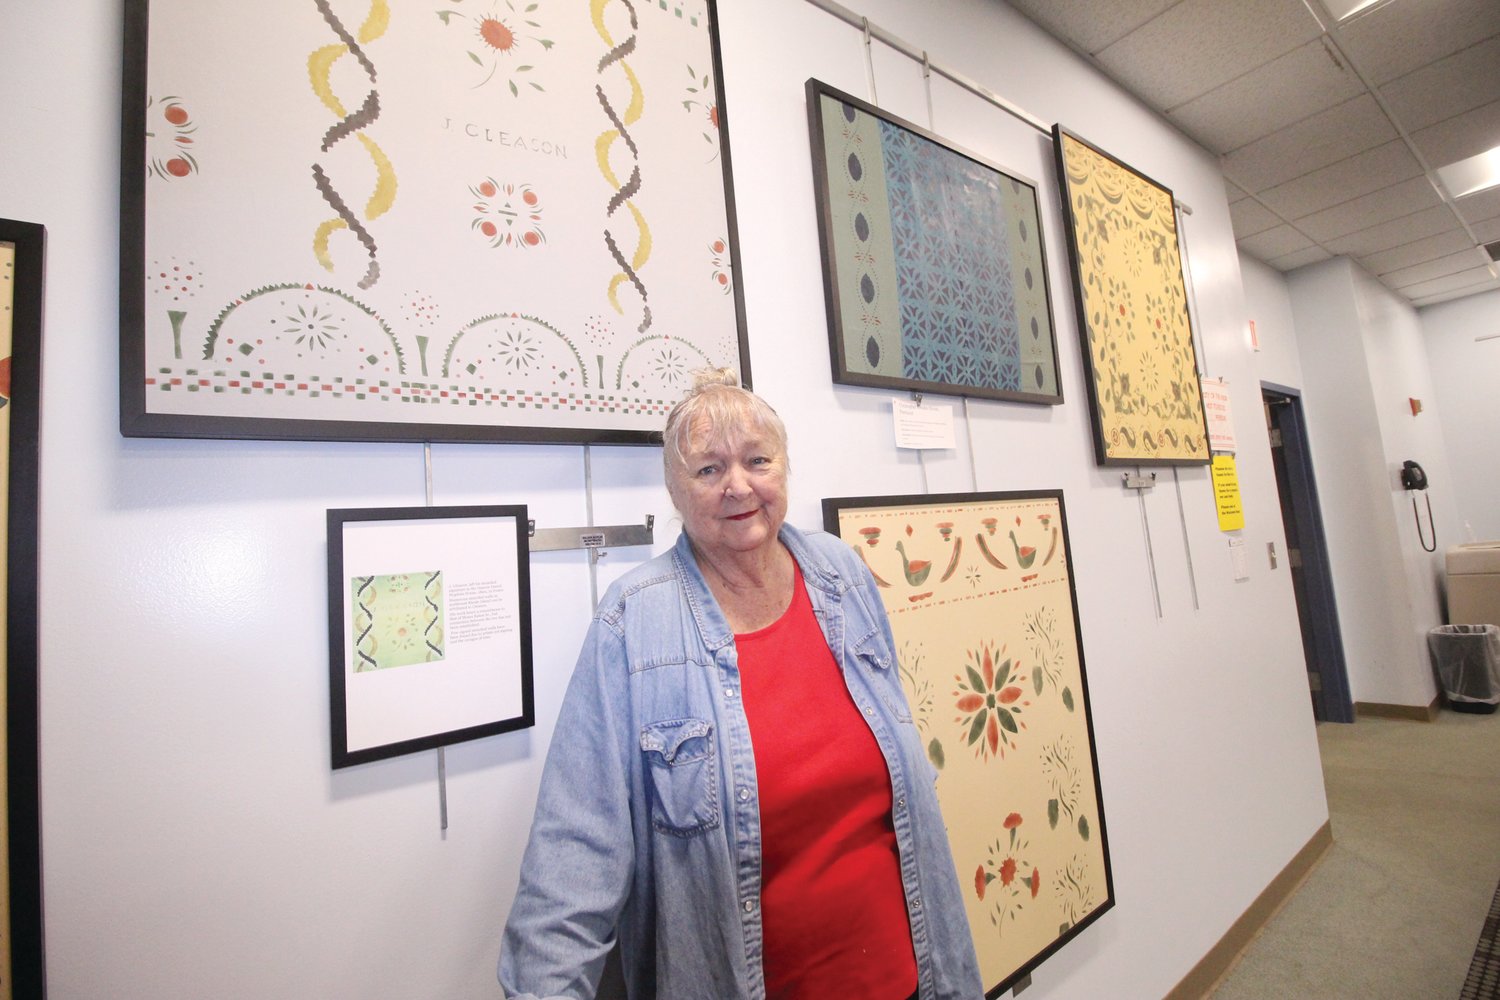 ARTIST AND HISTORIAN: Ann Eckert Brown has been working on preserving the lost art of wall stenciling for the last 60 years. Her exhibit, “Painted Rooms of Rhode Island,” is now on display at the Warwick Public Library.